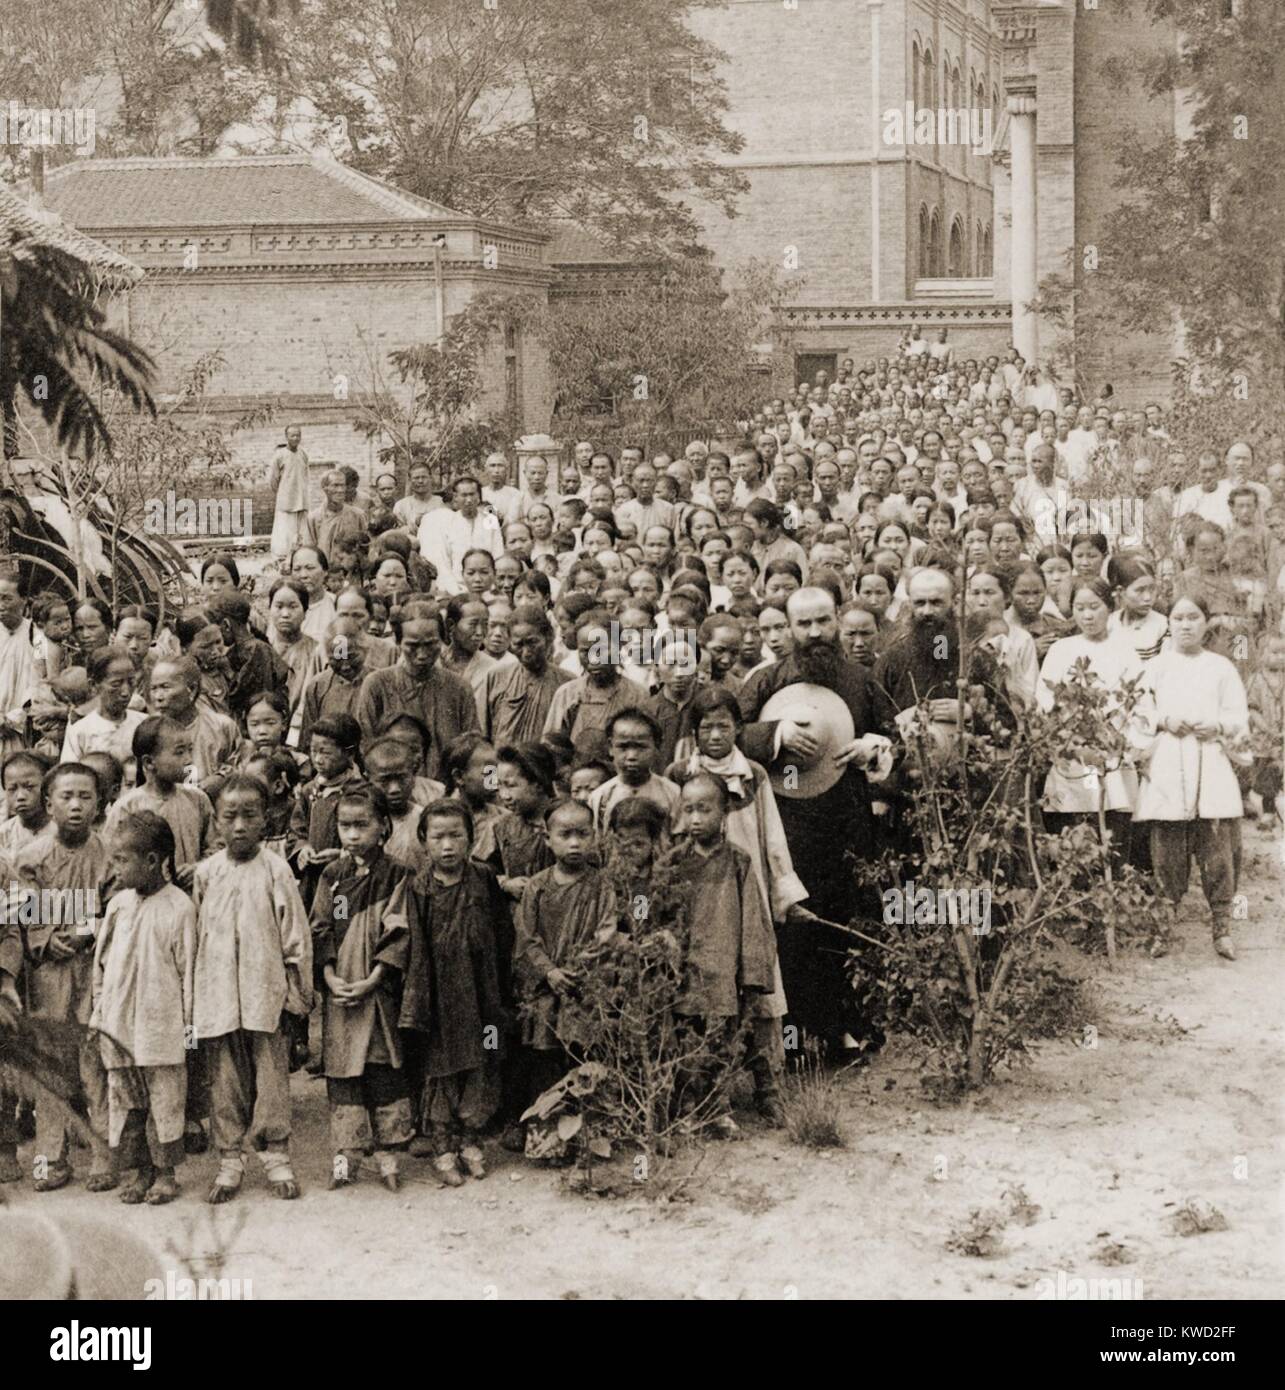 Chinese Christian refugees gathered by Father Quilloux in the Apostolic Mission, 1900. In Tianjin (Tientsin), during the Boxer Rebellion, they were sheltered during the fighting, as Christians were vulnerable to attacks by anti-foreign Boxers. The 1963 movie, 55 DAYS AT PEKING, was based on the war  (BSLOC 2017 20 3) Stock Photo